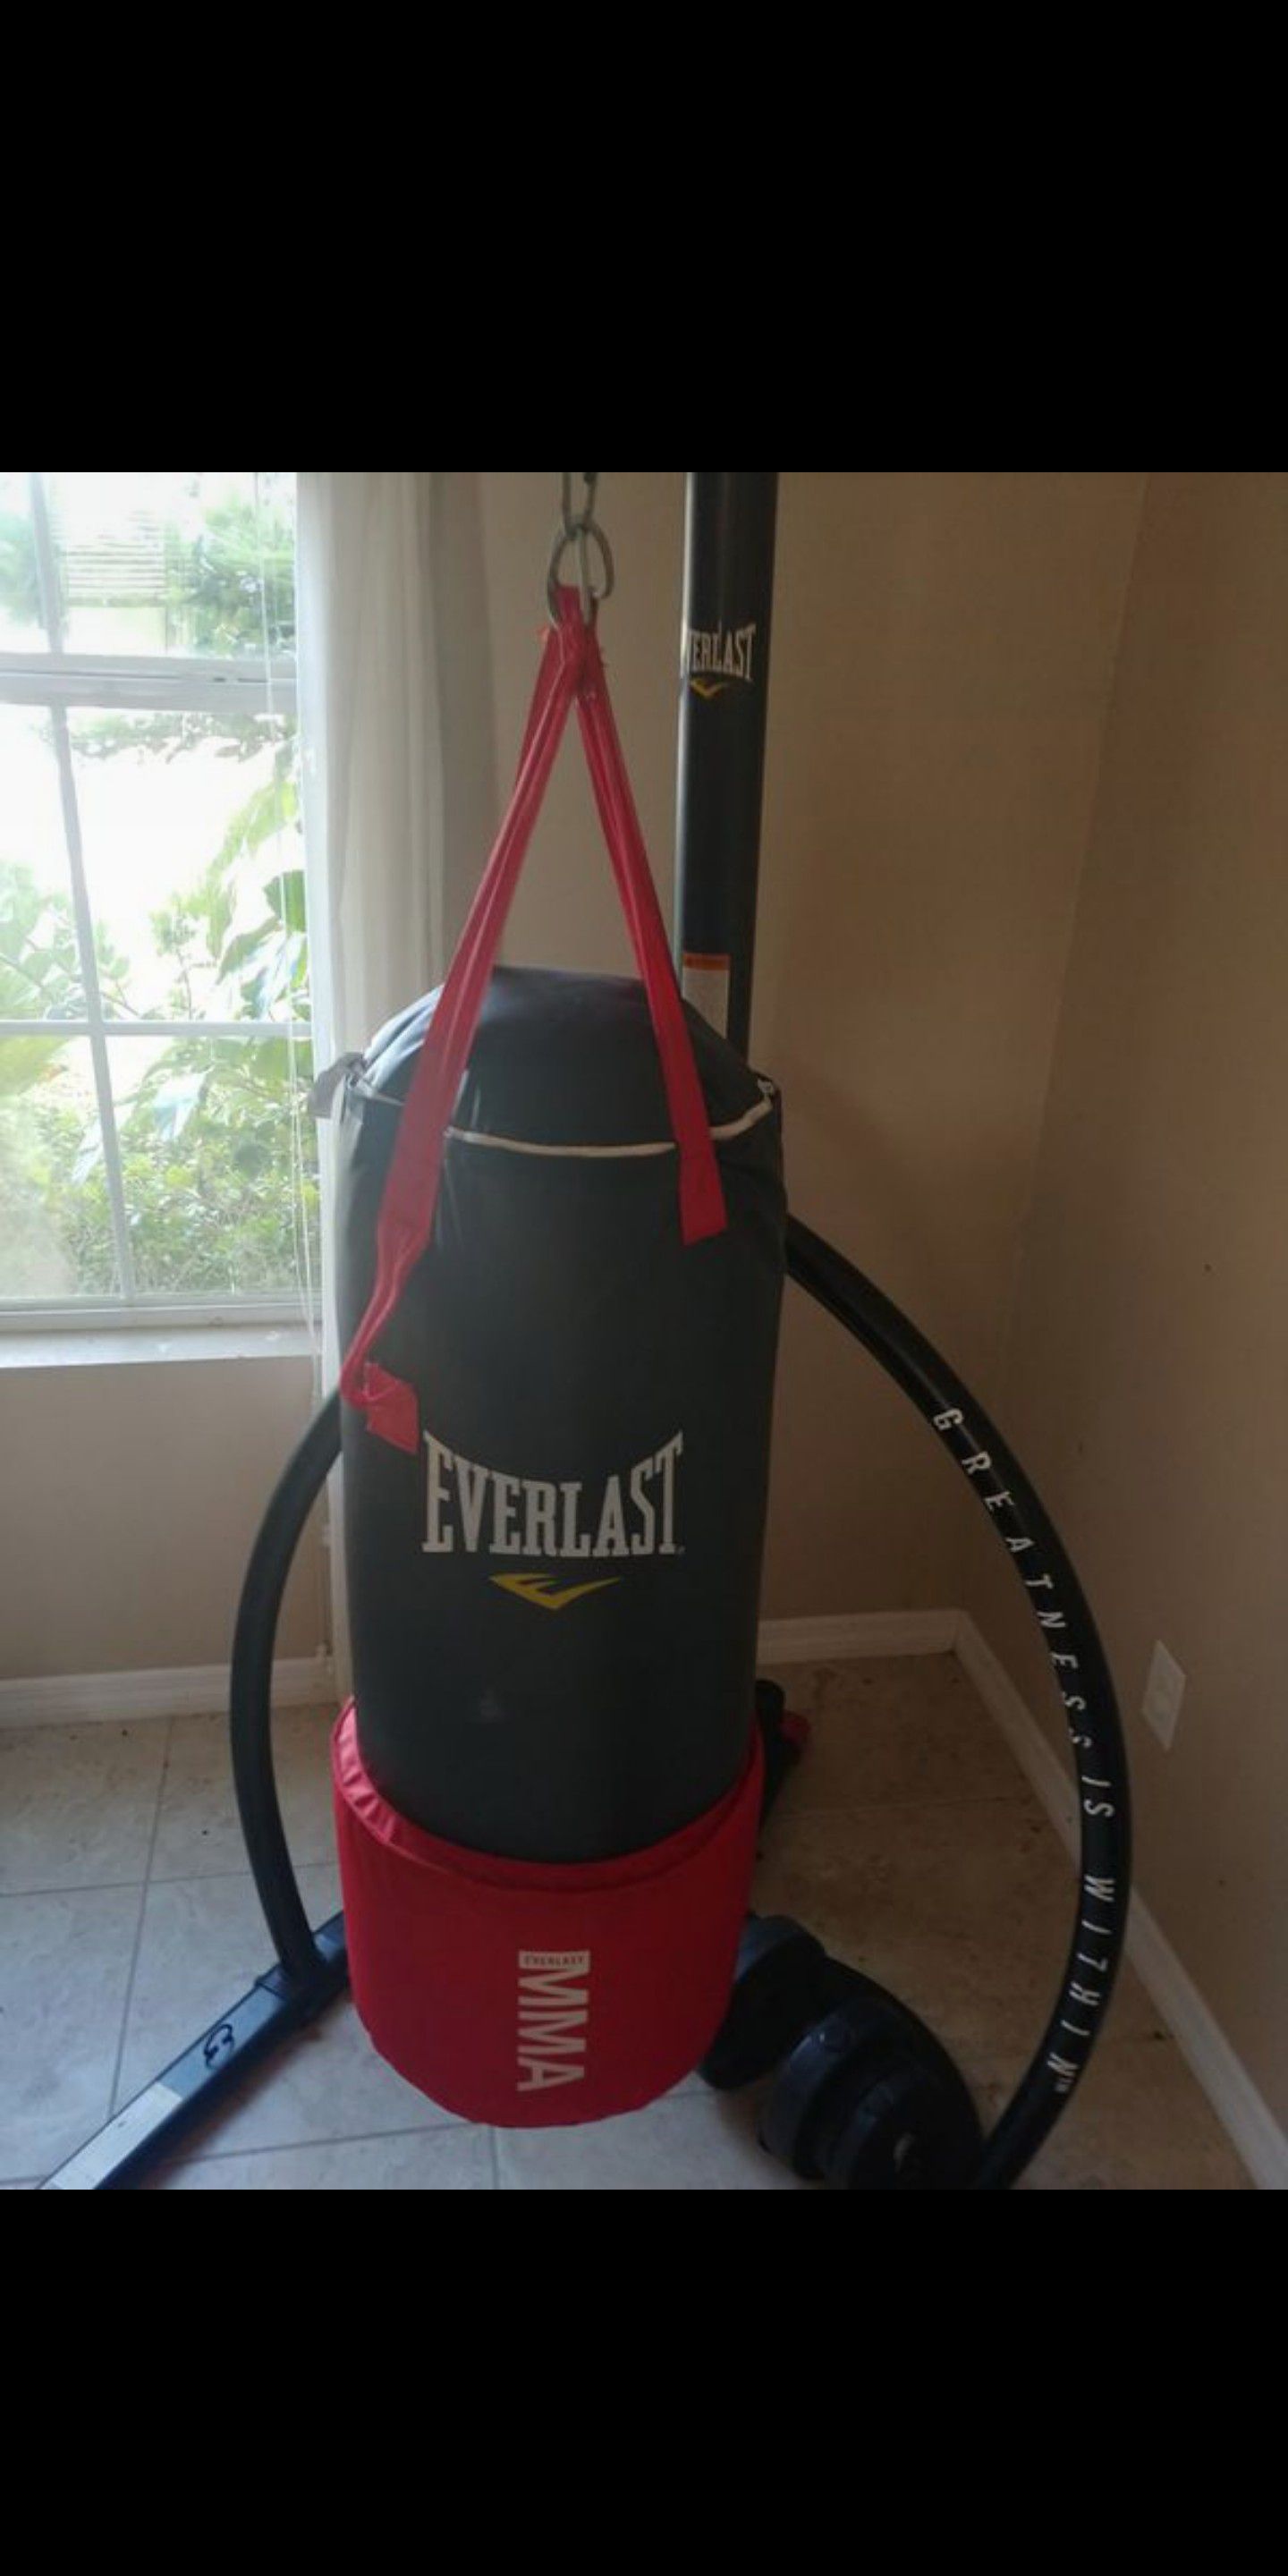 Everlast MMA punching bag with pull up station and Home Gym (Bench Press+Dumbbells) with weights